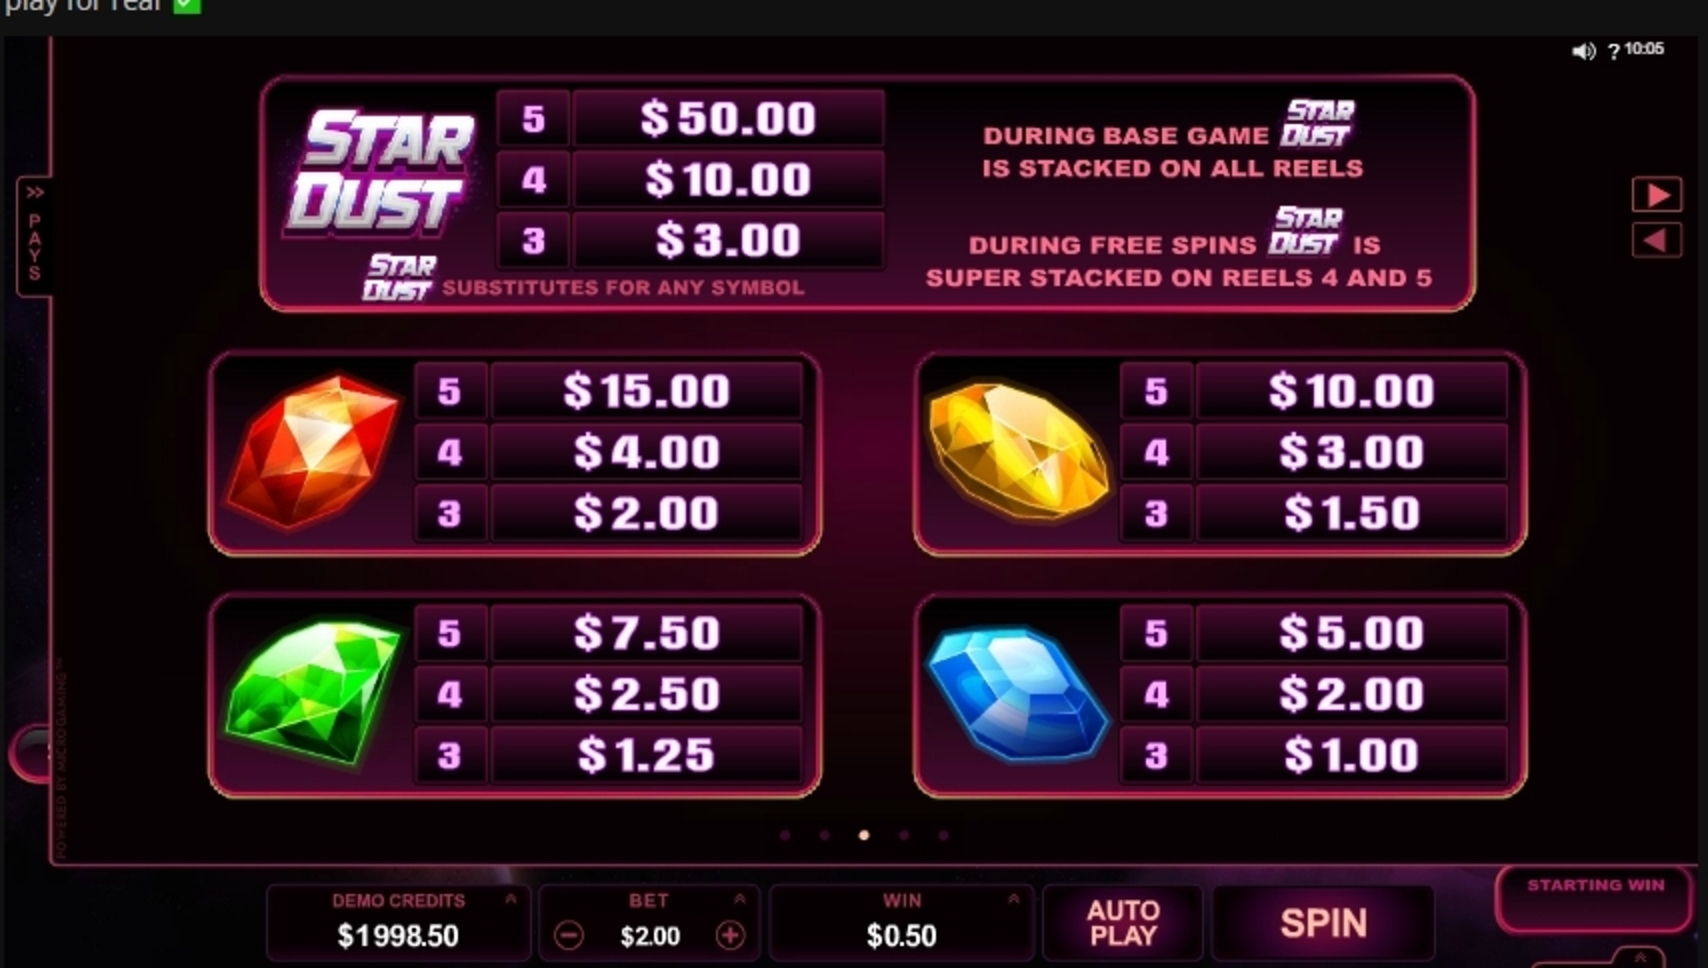 Info of Star Dust Slot Game by Microgaming